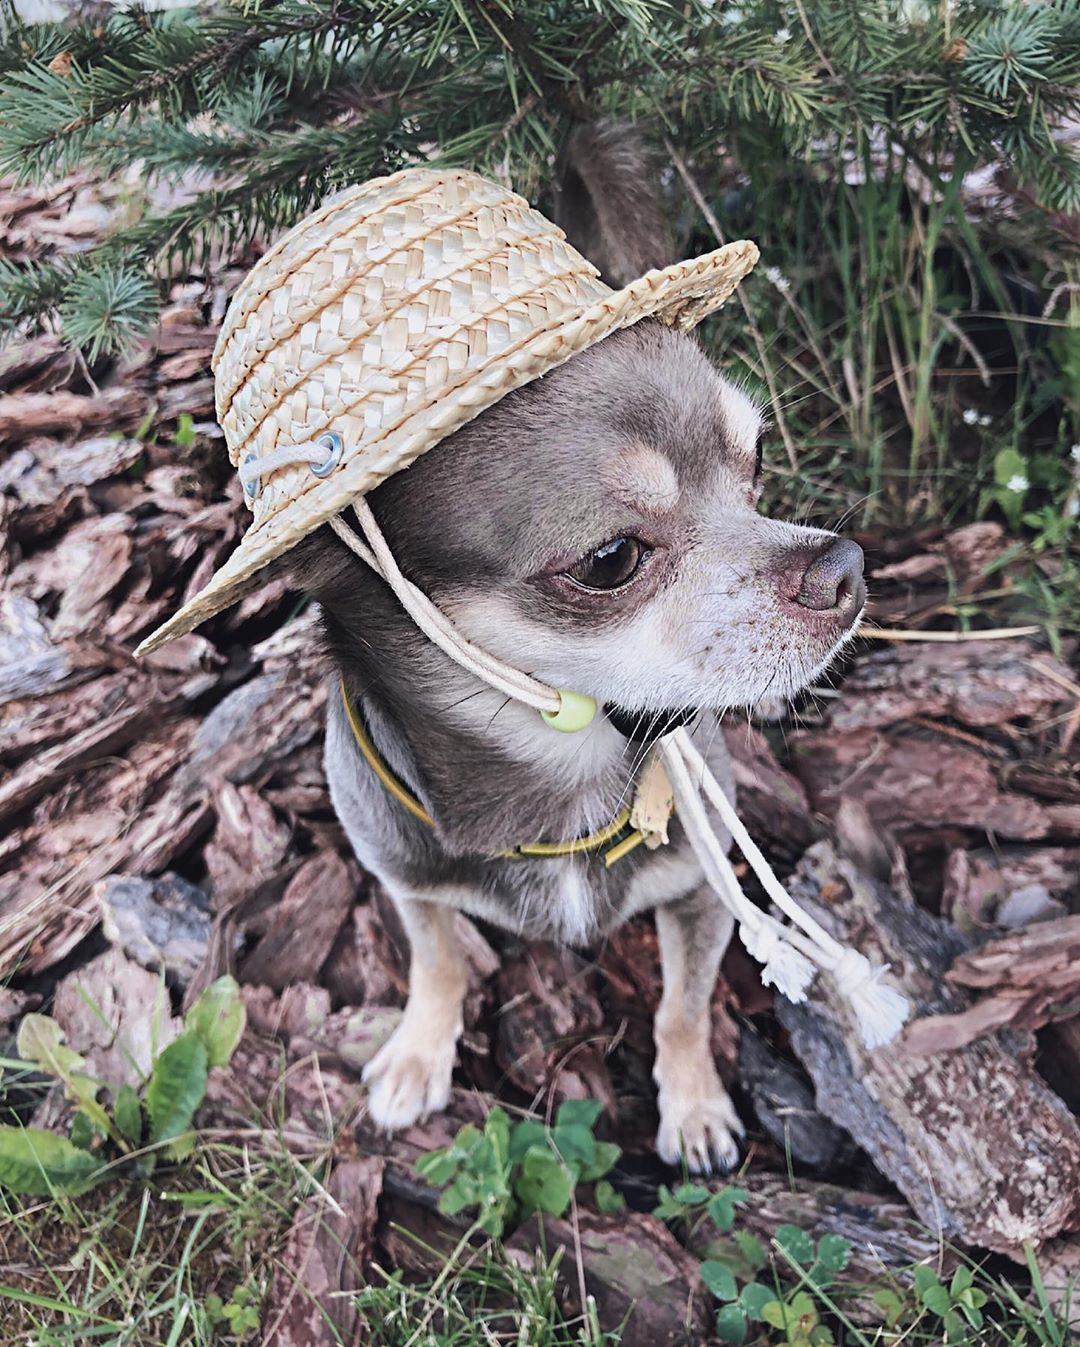 A Chihuahua rattan hat while sitting on the ground in the forest